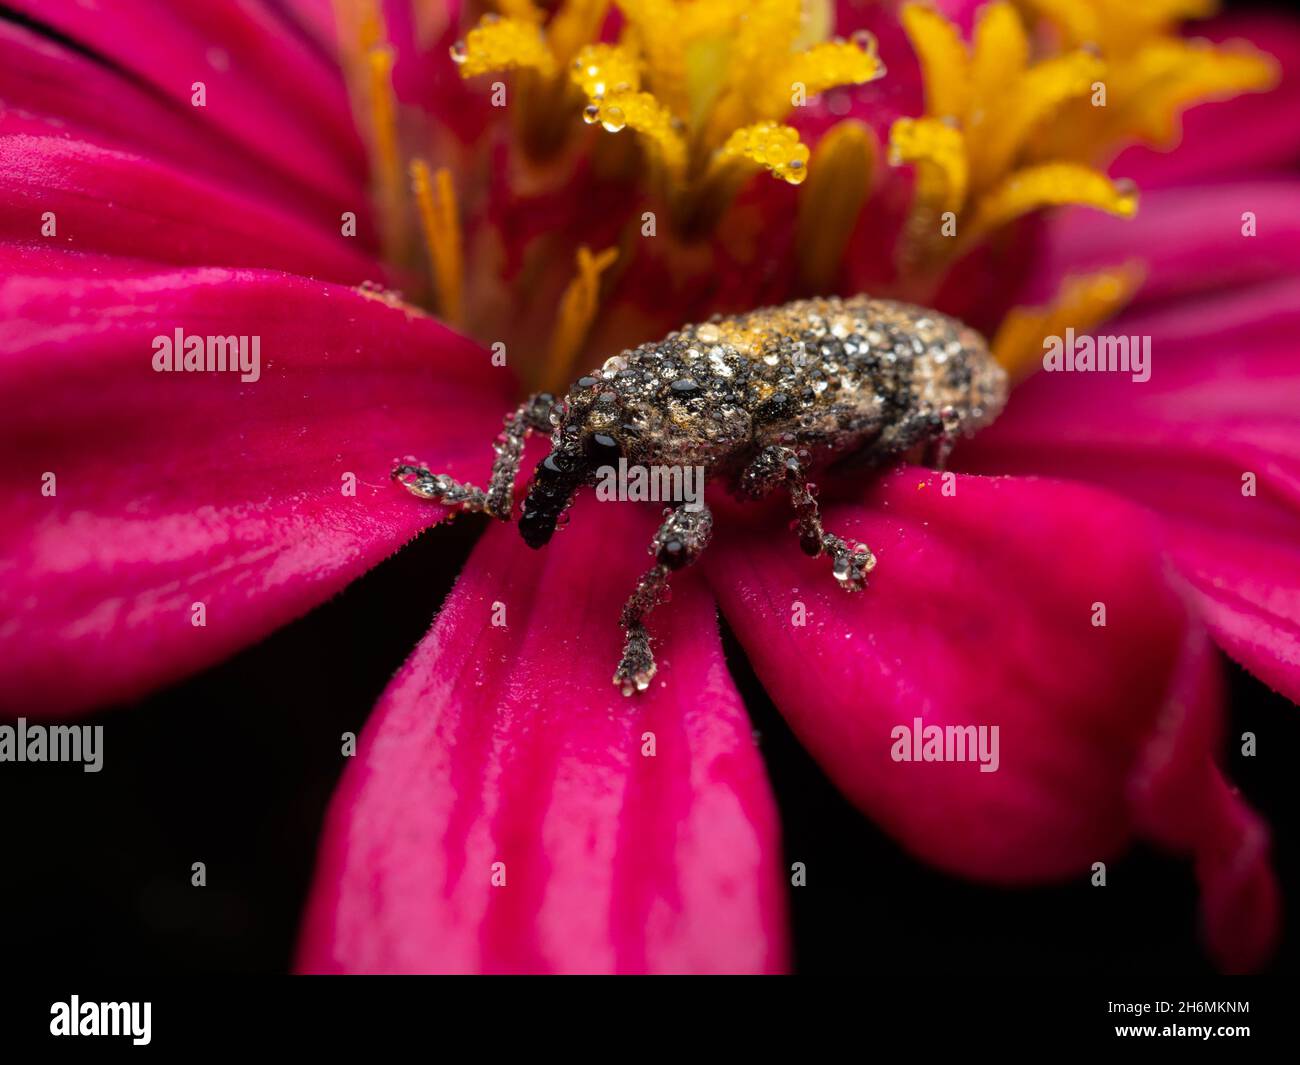 Weevils are beetles belonging to the superfamily Curculionoidea, known for their elongated snouts. They are usually small, less than 6 mm in length, a Stock Photo